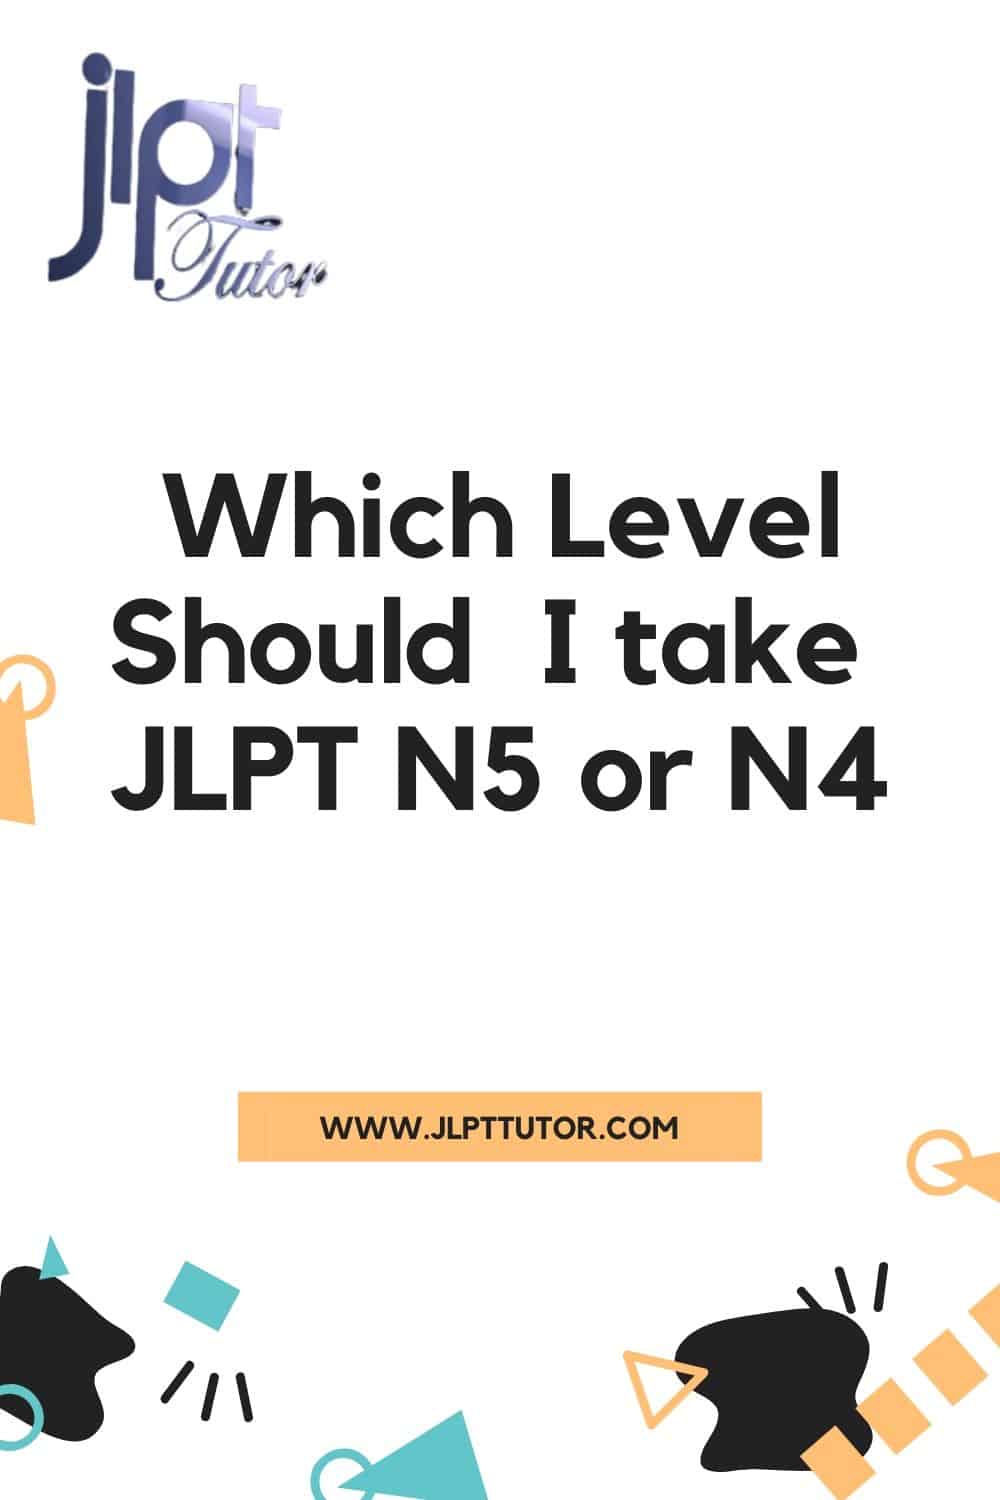 Can I take JLPT N4 without N5